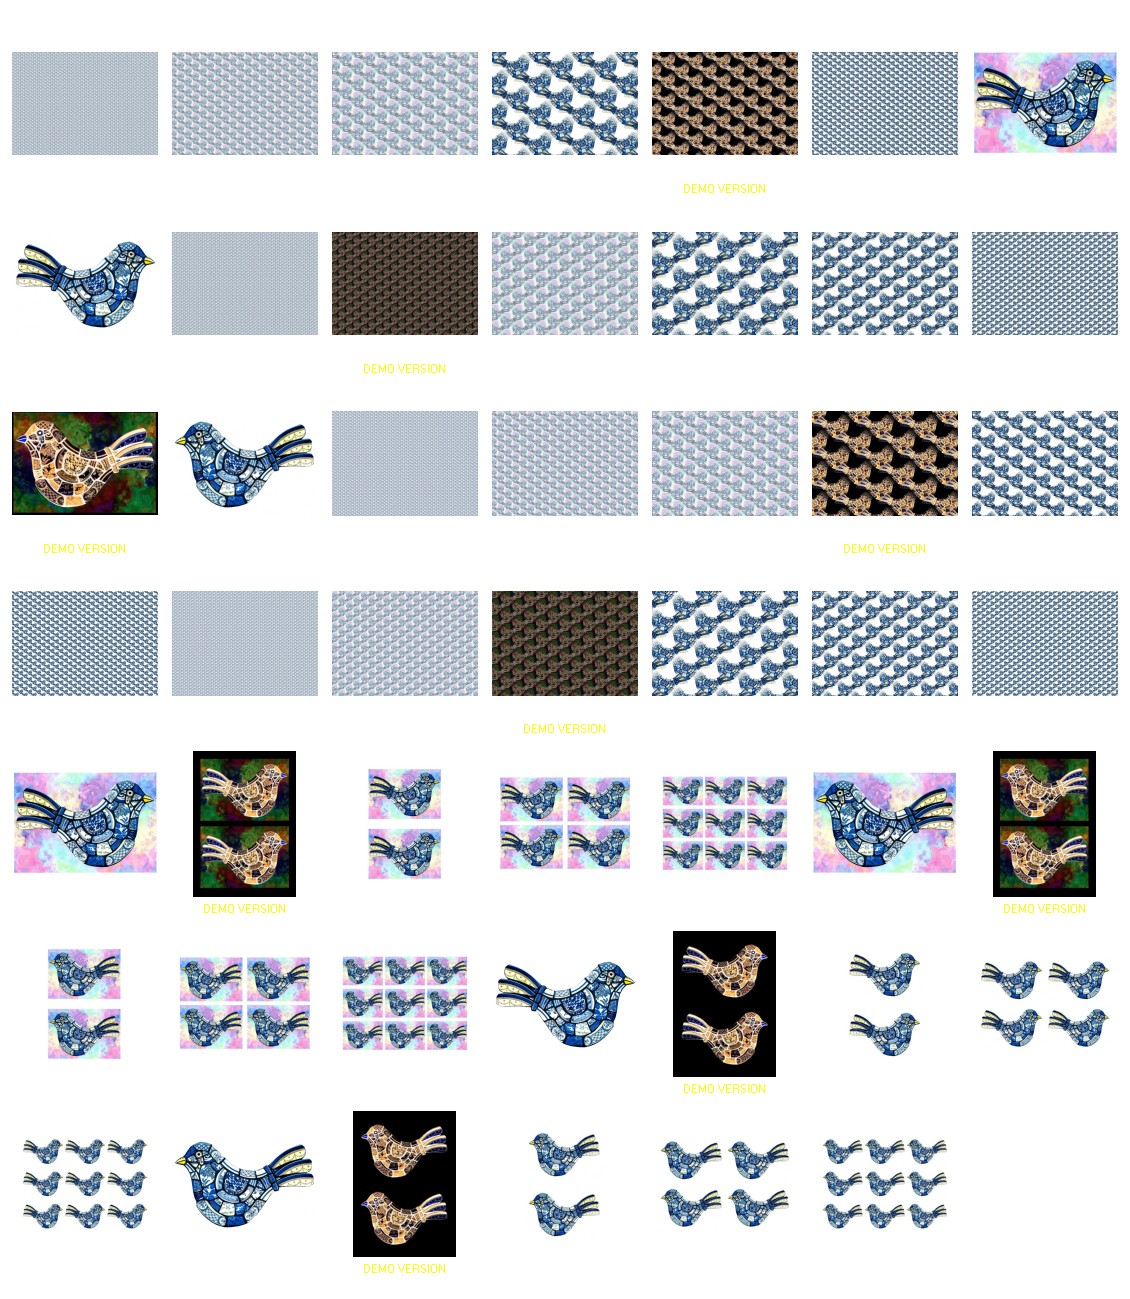 Tiled Effect Birds - Set 02 - 48 Pages to Download